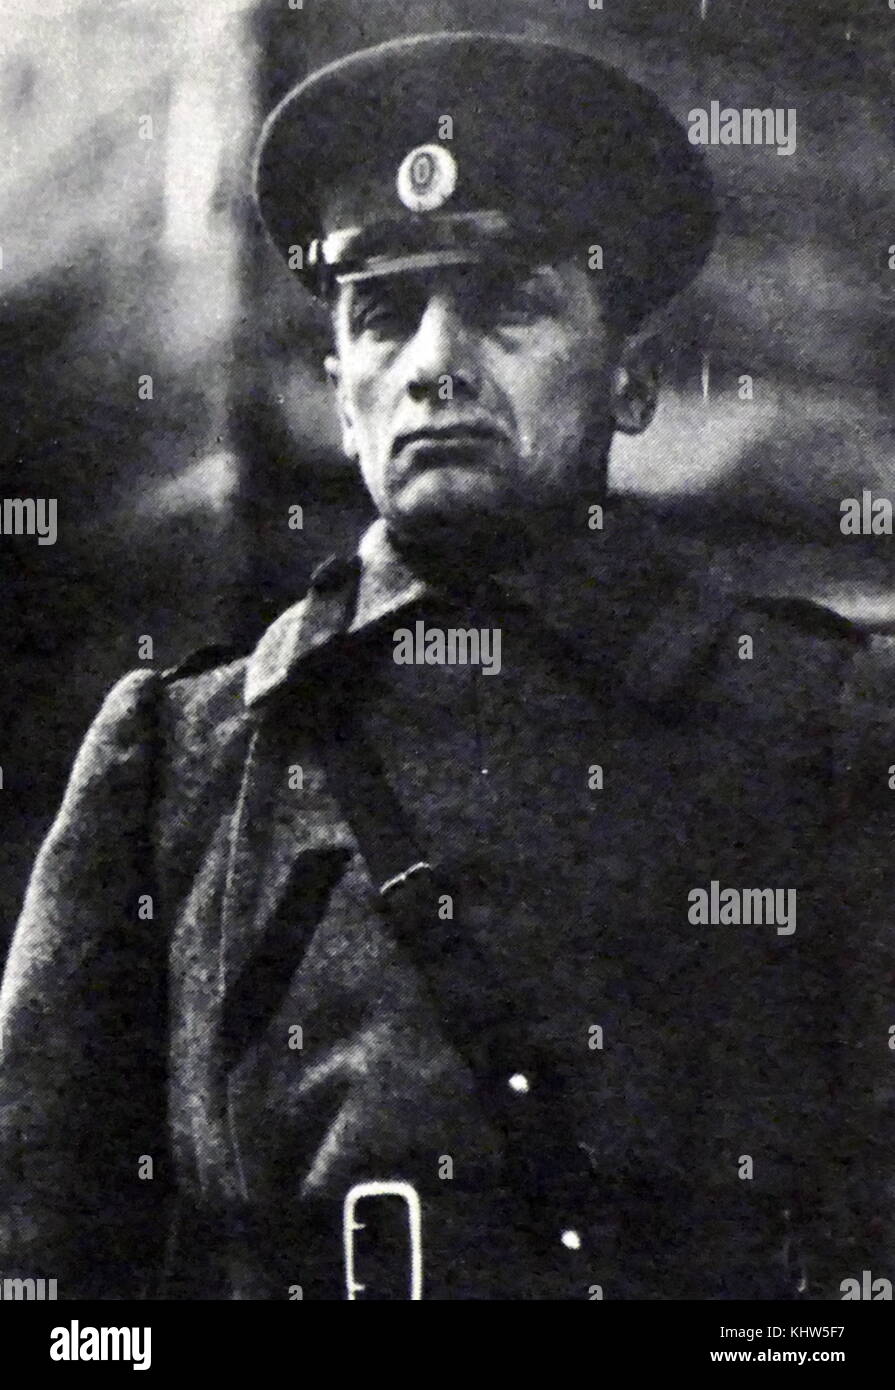 Photographic portrait of Alexander Kolchak (1874-1920) a Russian polar explorer and commander in the Imperial Russian Navy, who fought in the Russo-Japanese War and the First World War. Dated 20th Century Stock Photo